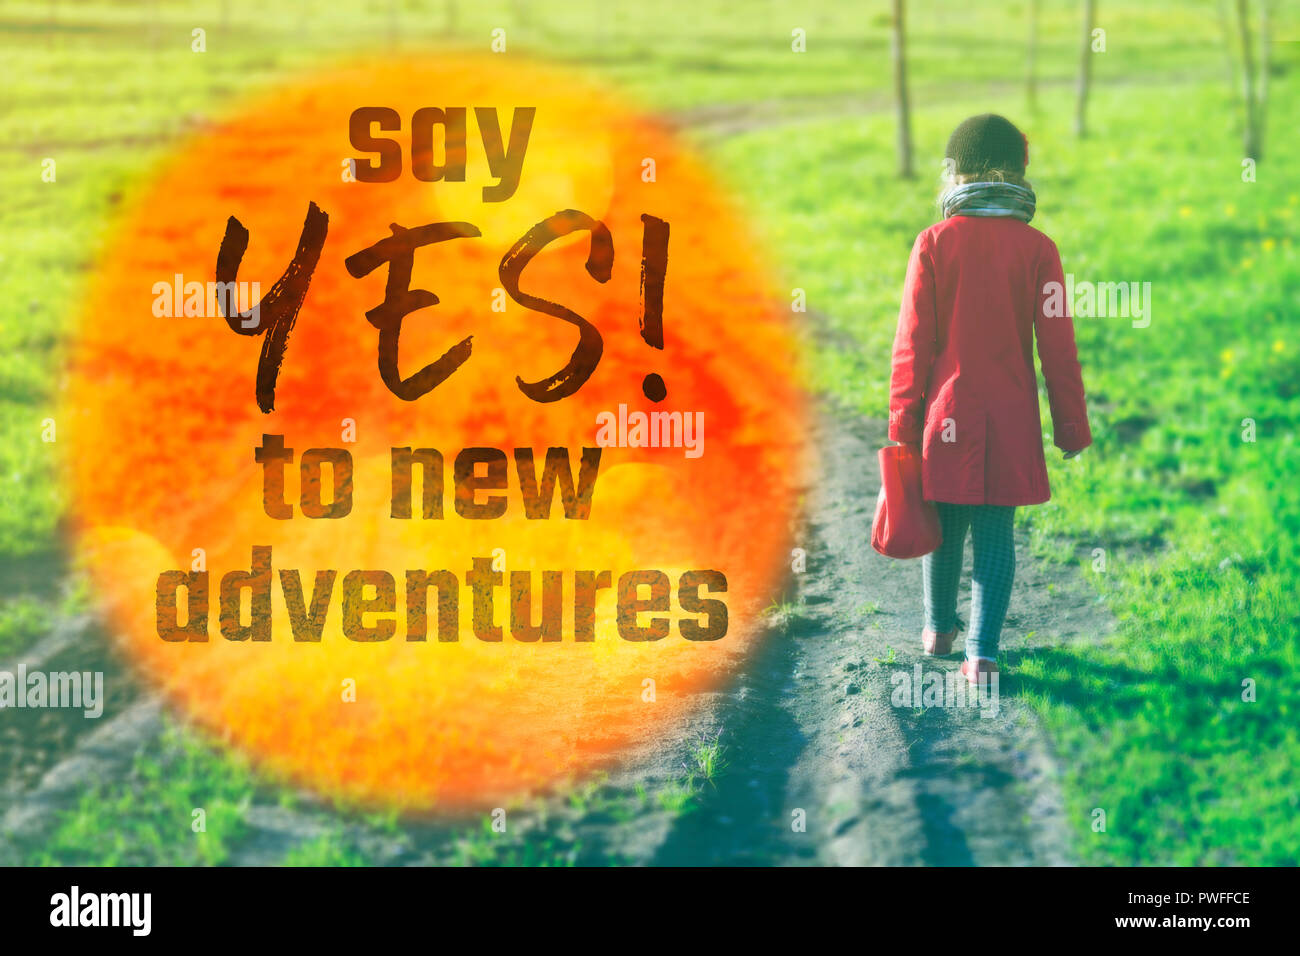 say yes to new adventures slogan printed over image with little girl going away Stock Photo